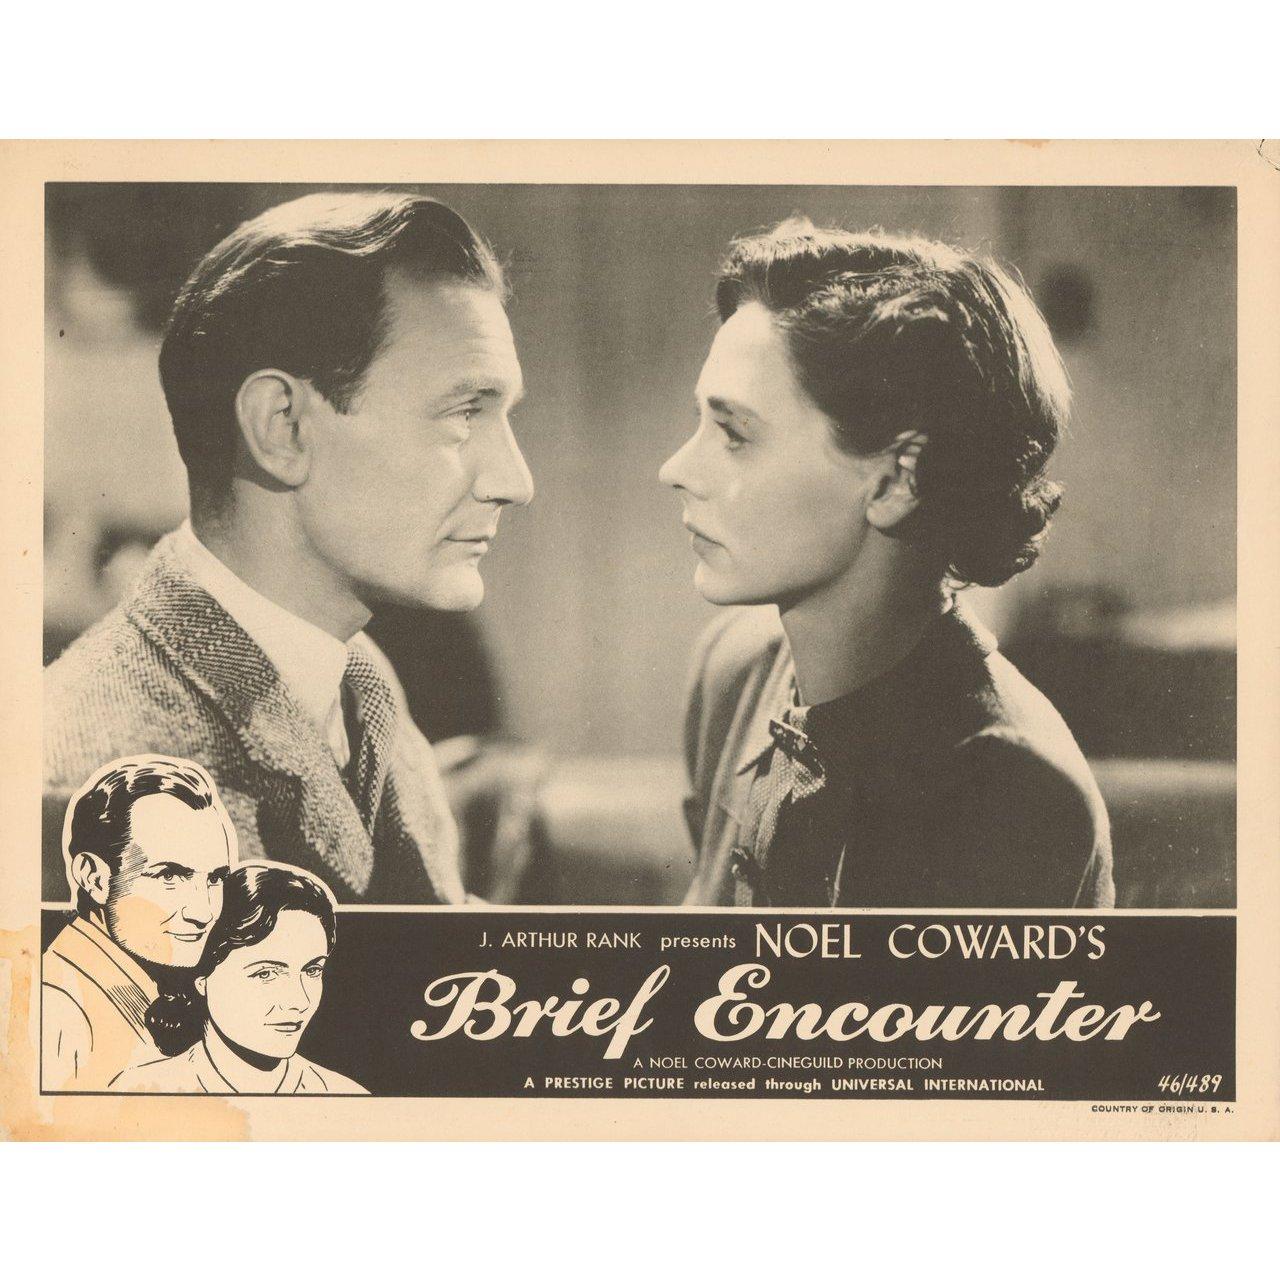 Original 1946 U.S. scene card for the first U.S. theatrical release of the film Brief Encounter directed by David Lean with Celia Johnson / Trevor Howard / Stanley Holloway / Joyce Carey. Very Good-Fine condition. Please note: the size is stated in